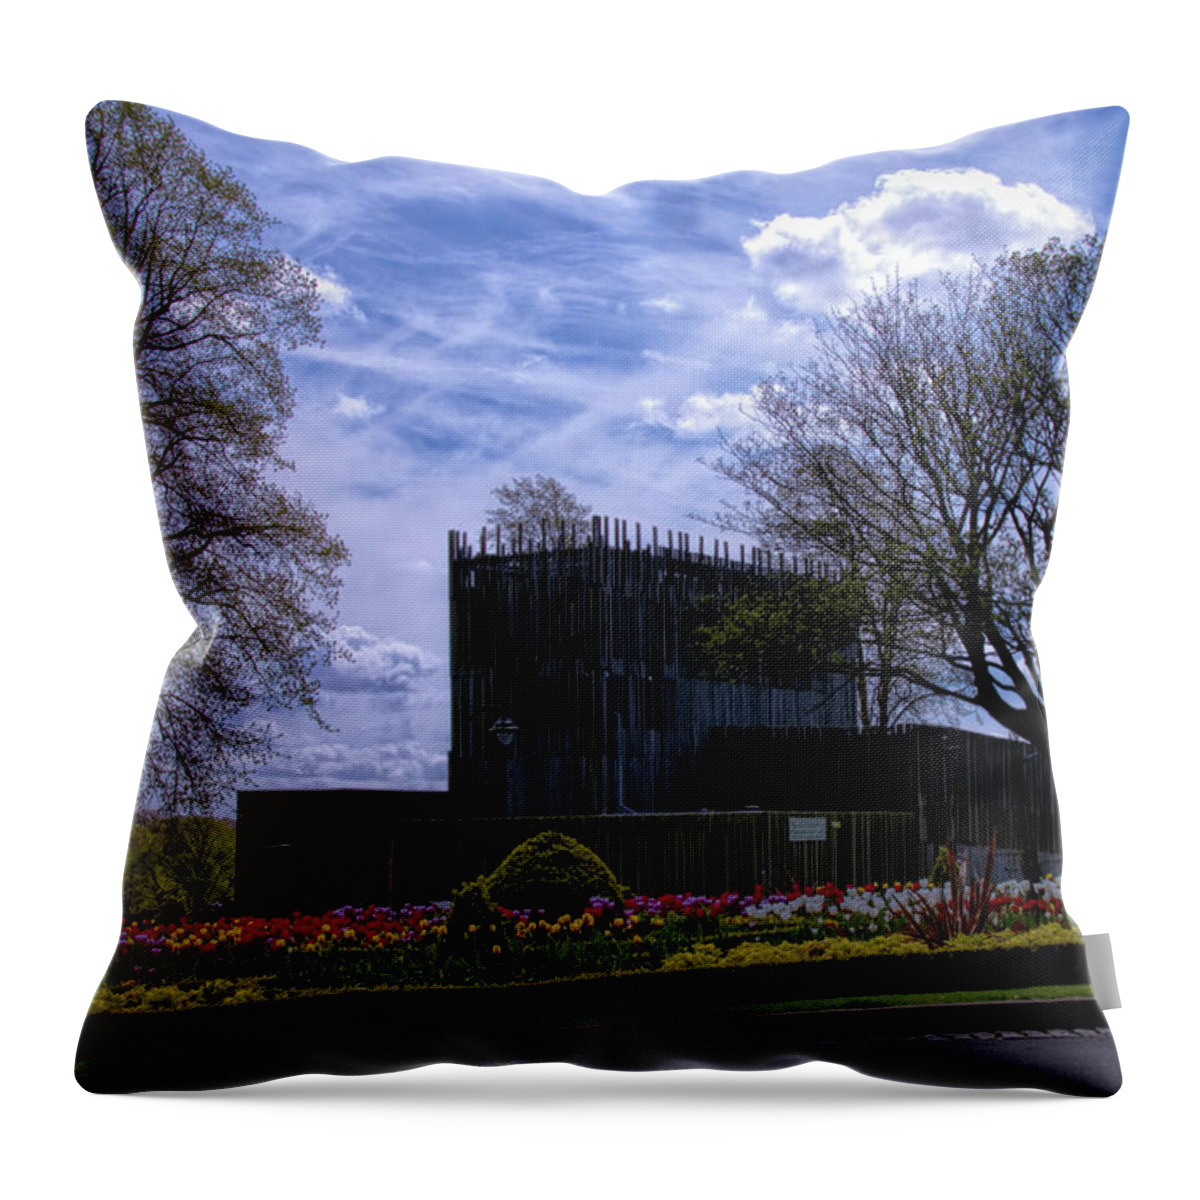 Building Throw Pillow featuring the photograph Dartmouth Park Pavillion by Stephen Melia